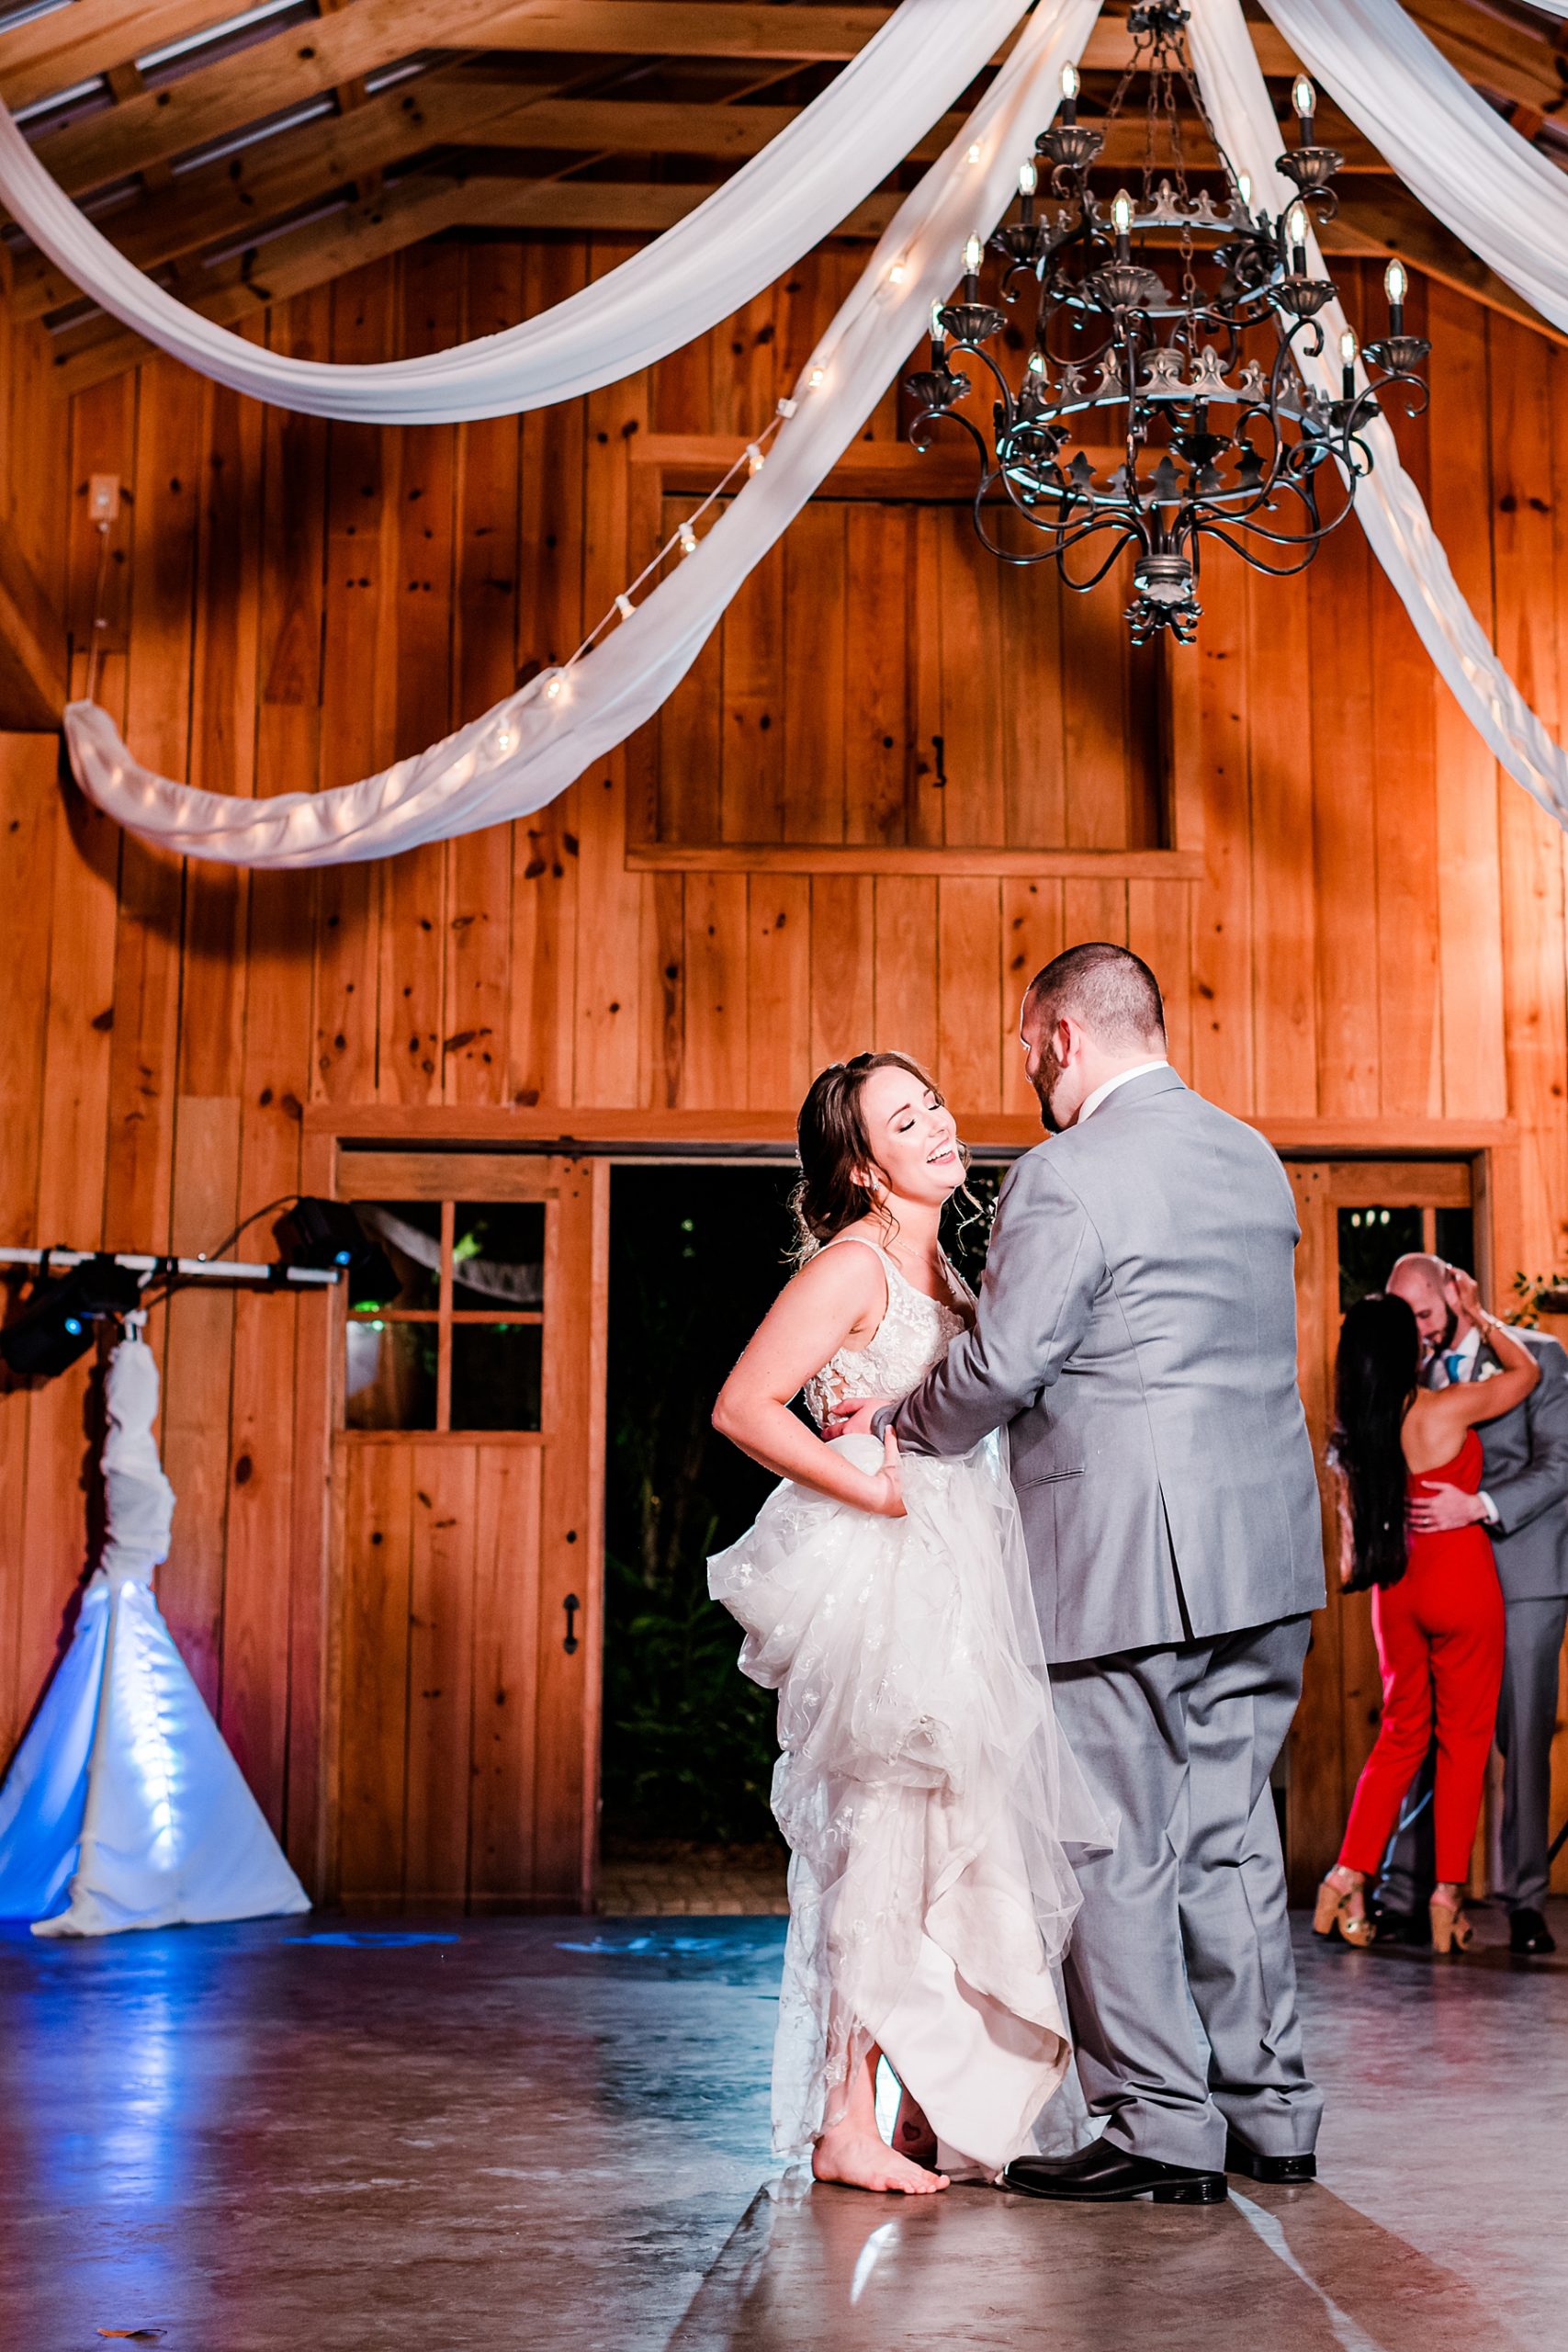 Last Dance at wedding | The Delamater House Wedding | Chynna Pacheco Photography-1138